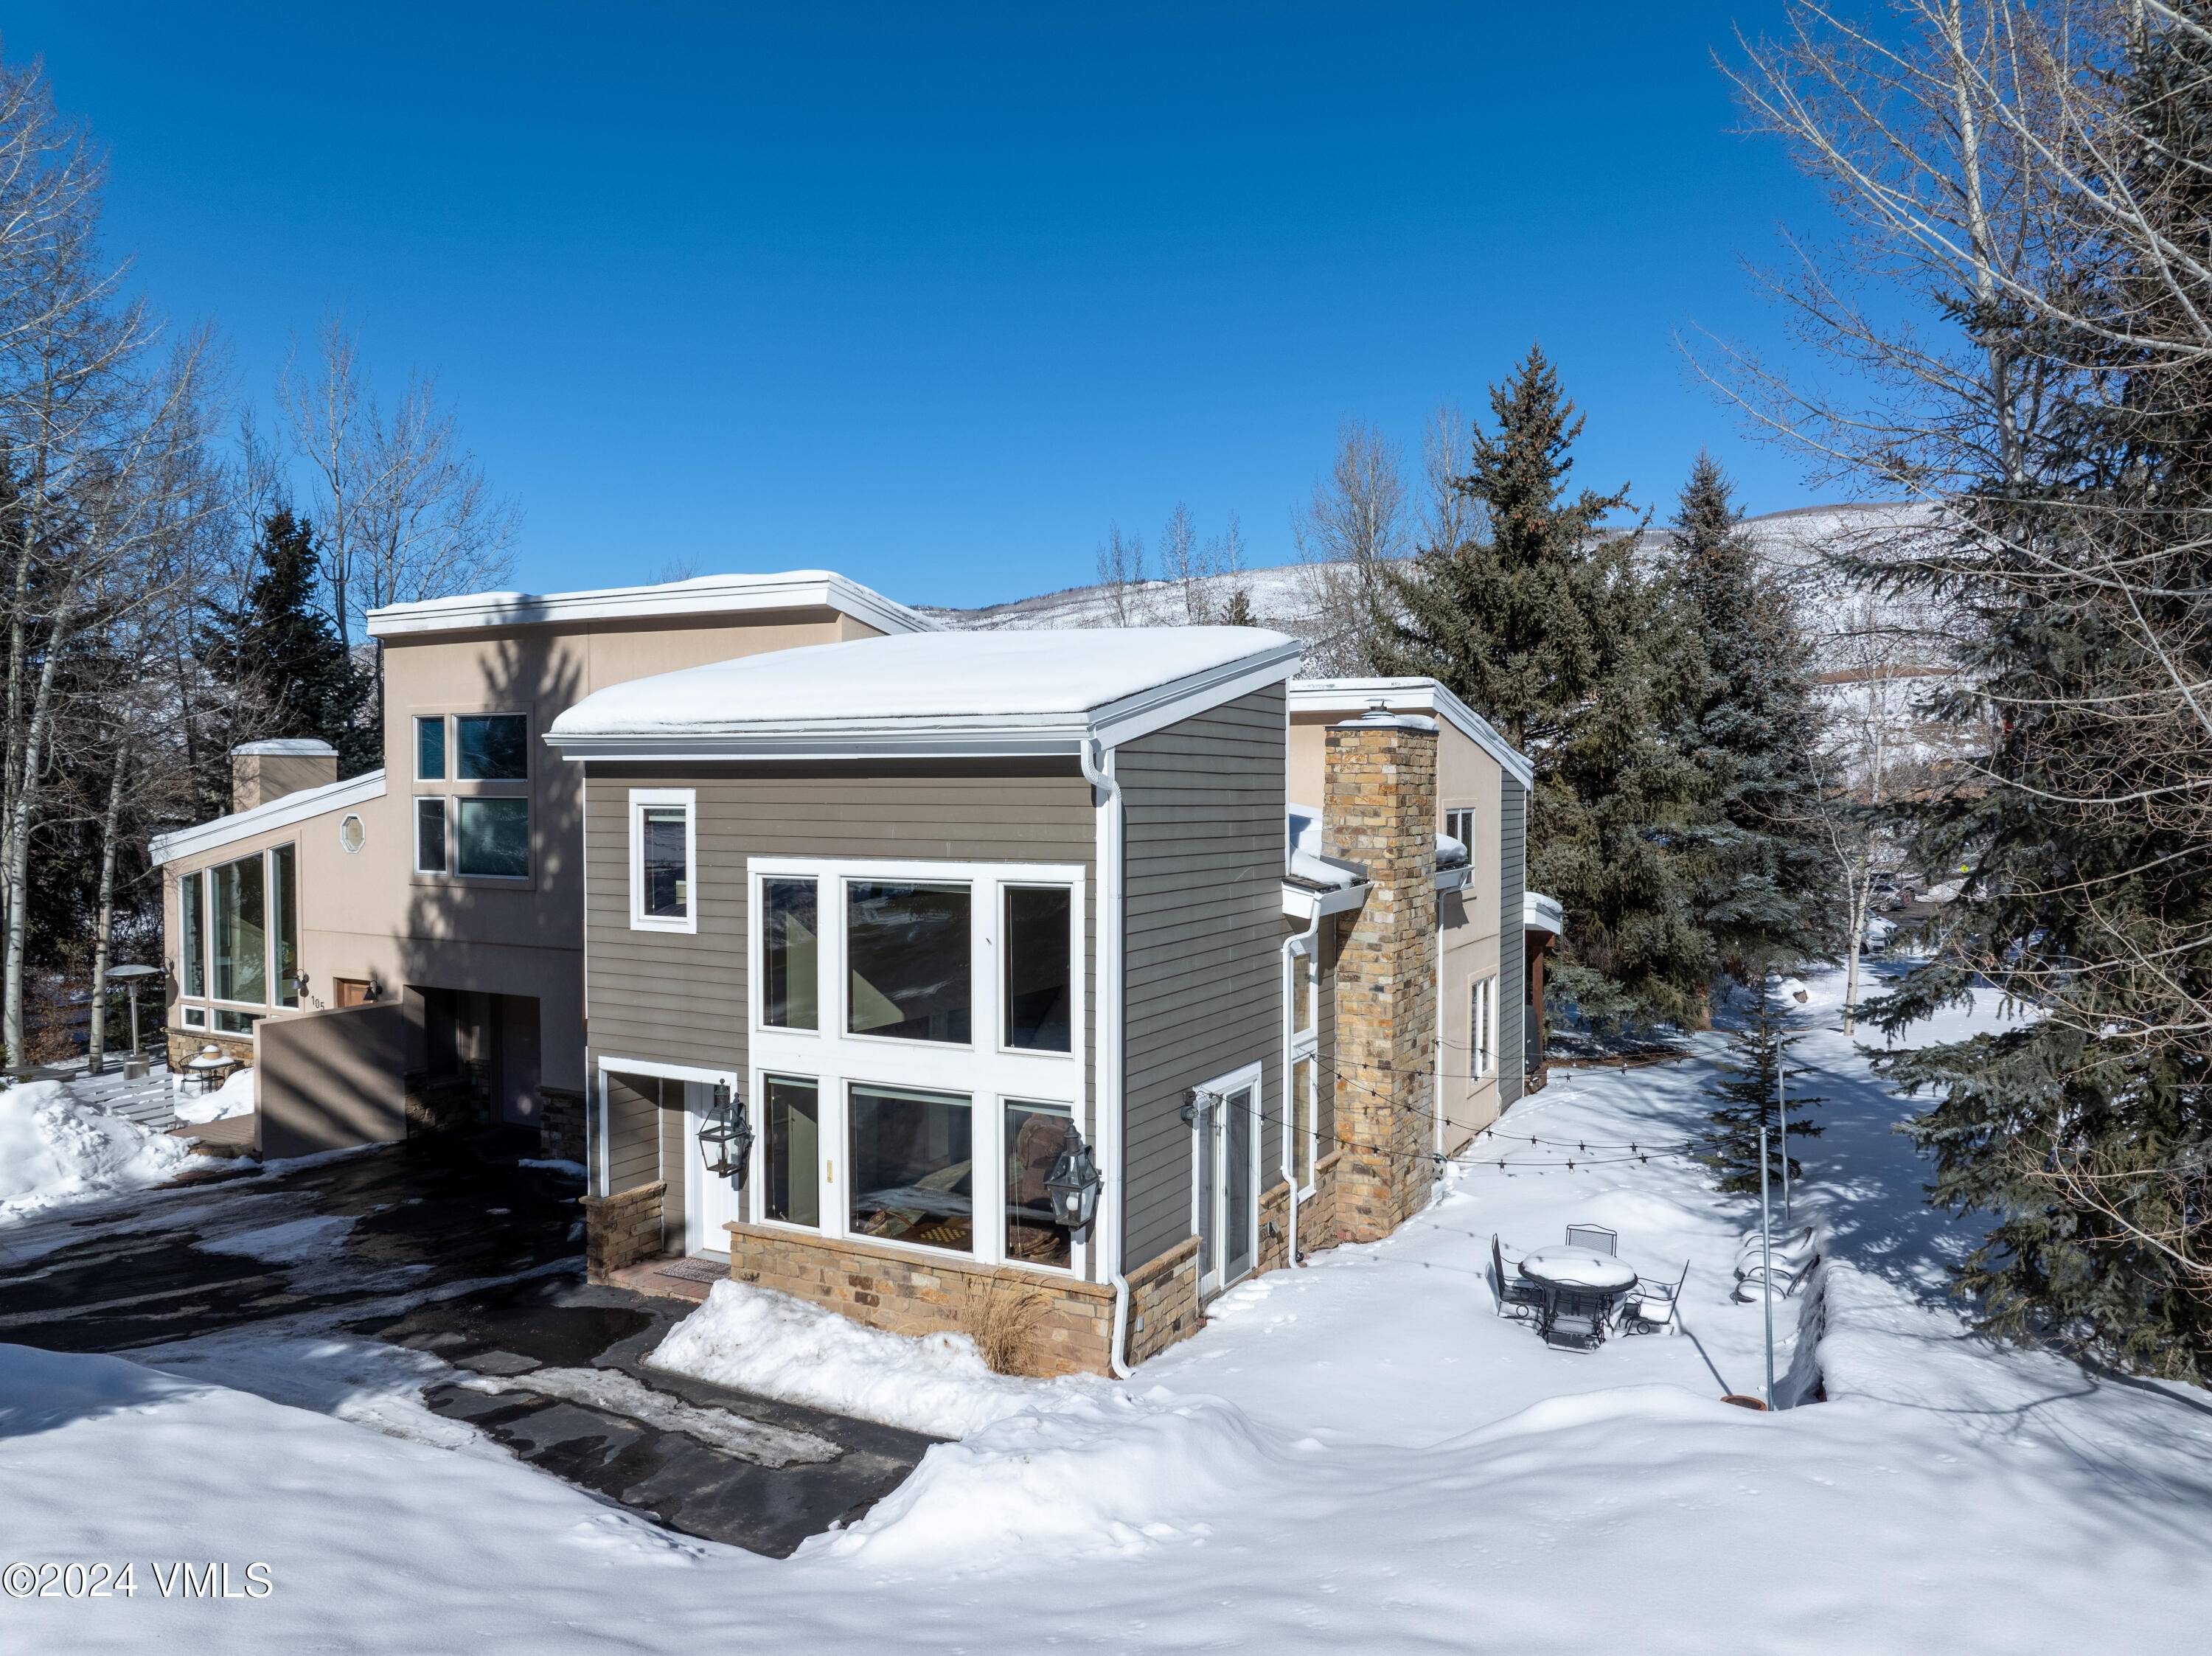 This 3 bedroom home is nestled in the serenity of mountain living in Eagle Vail with vaulted ceilings that overlook the golf course.